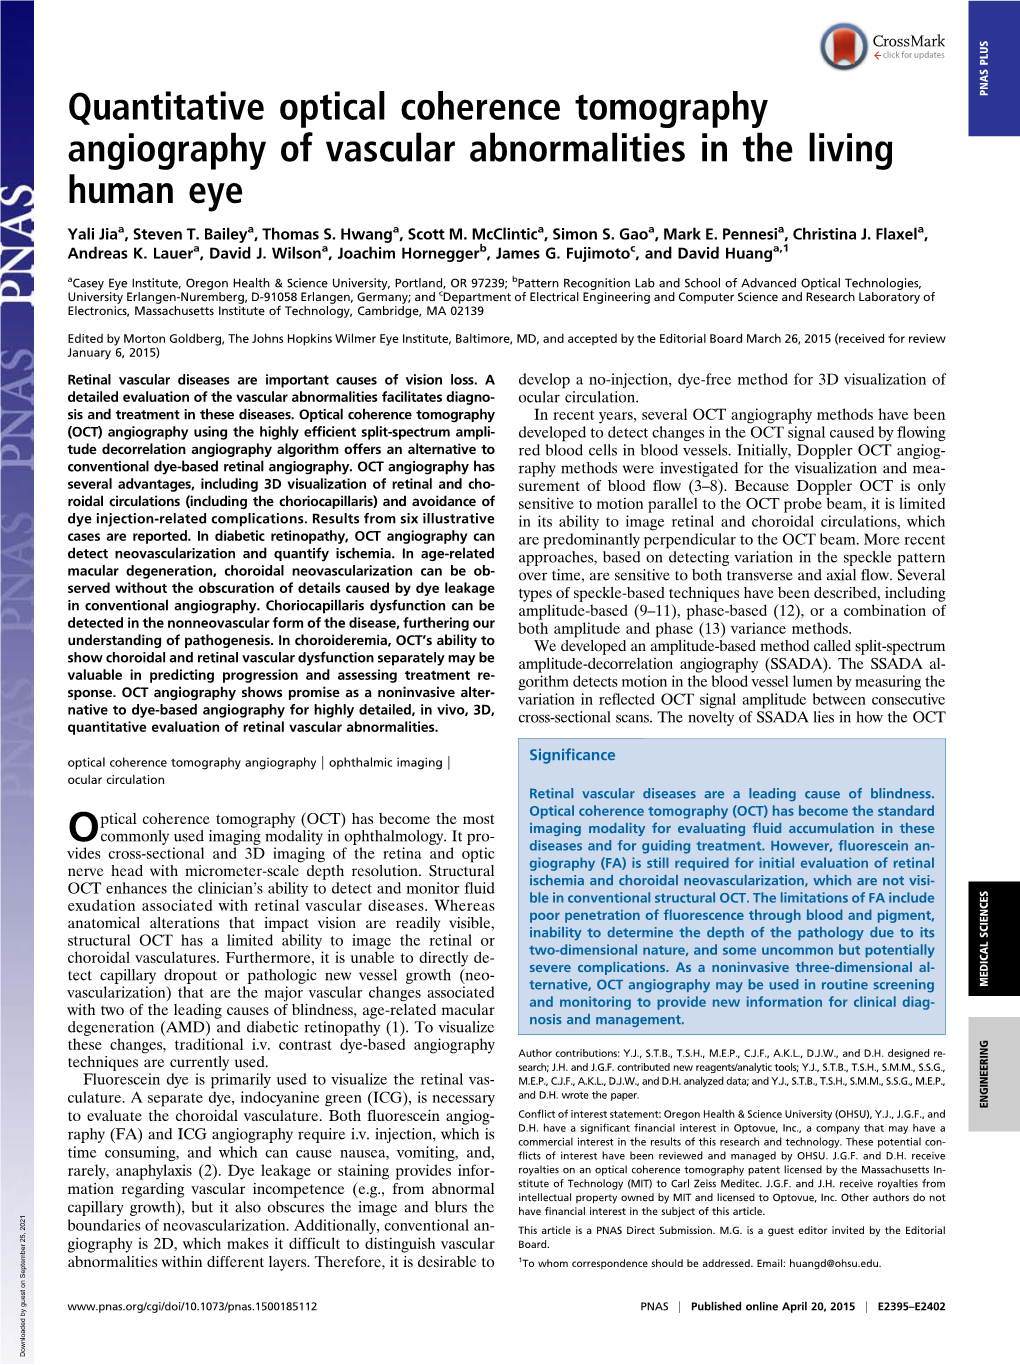 Quantitative Optical Coherence Tomography Angiography of Vascular Abnormalities in the Living Human